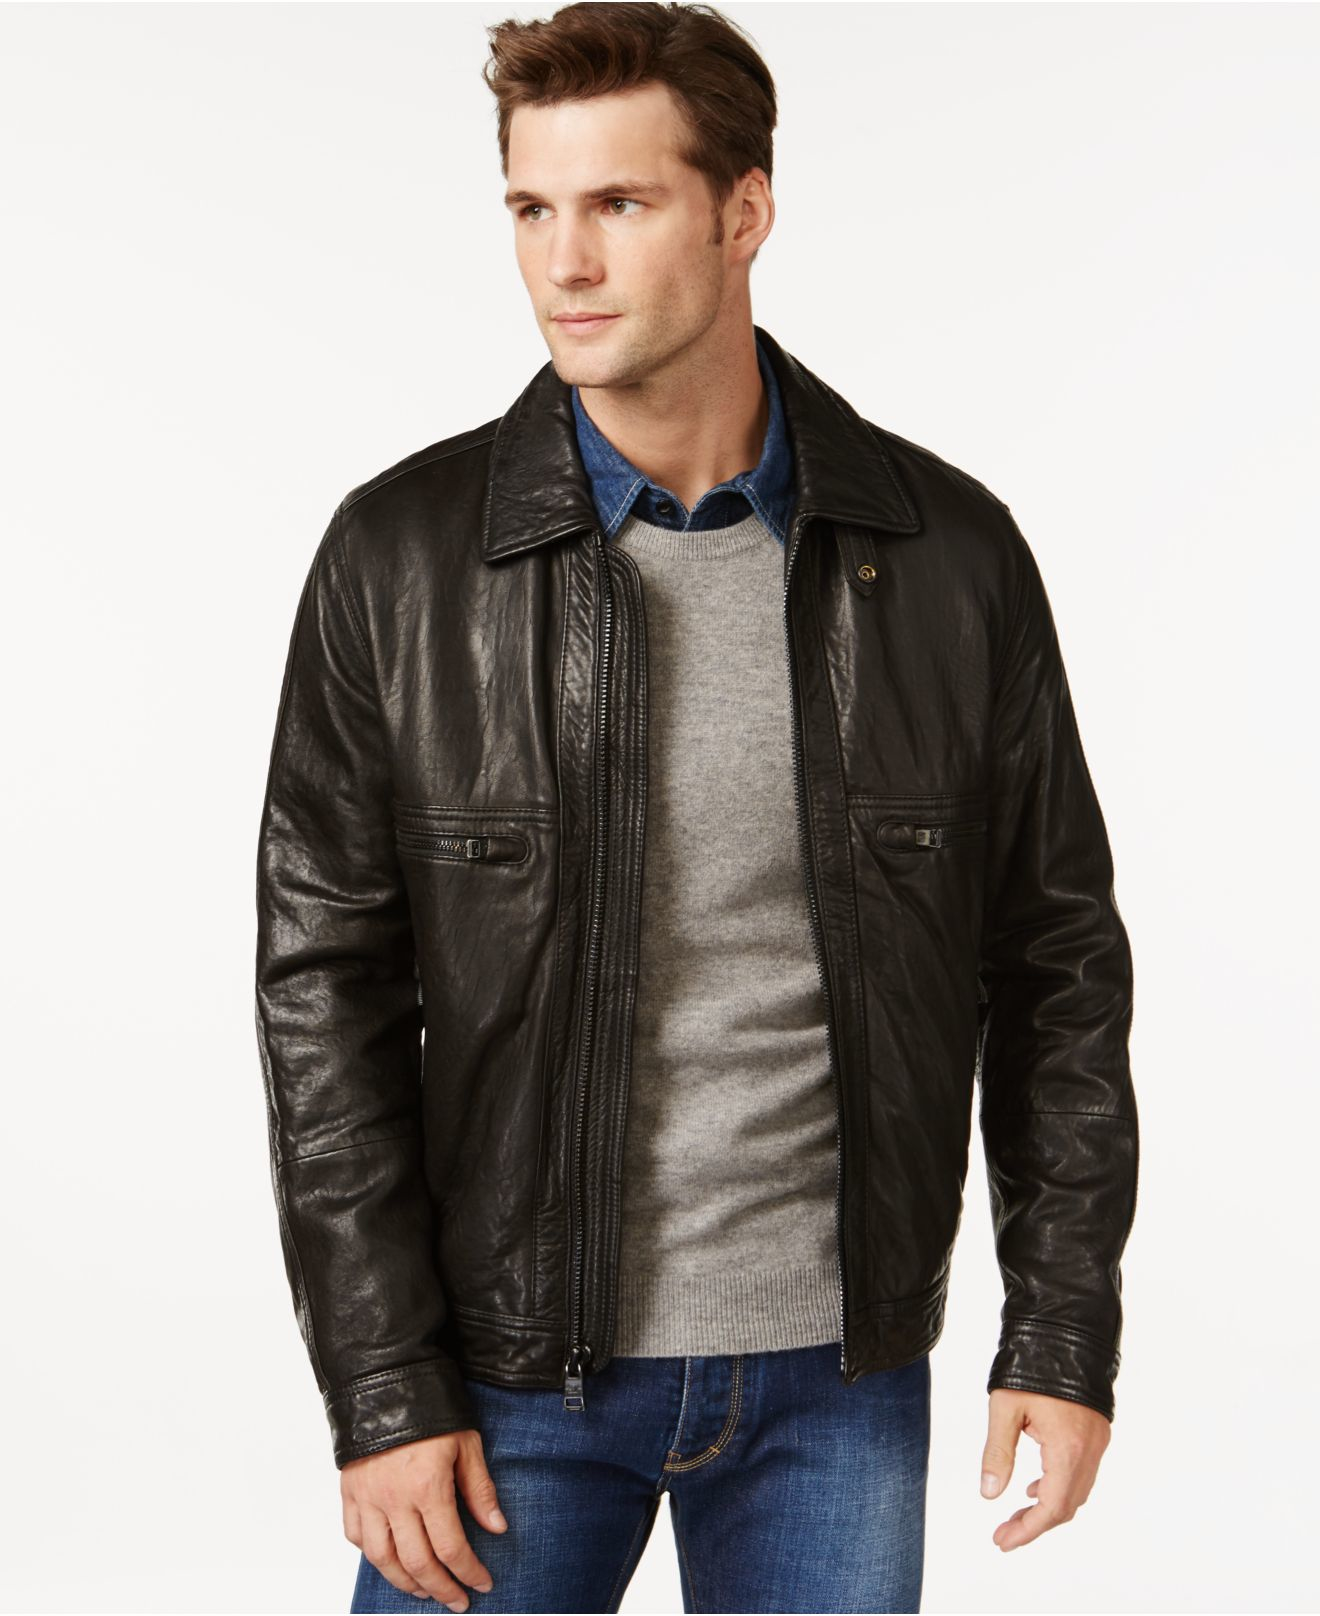 Lyst - Andrew Marc Exeter Leather Jacket in Black for Men